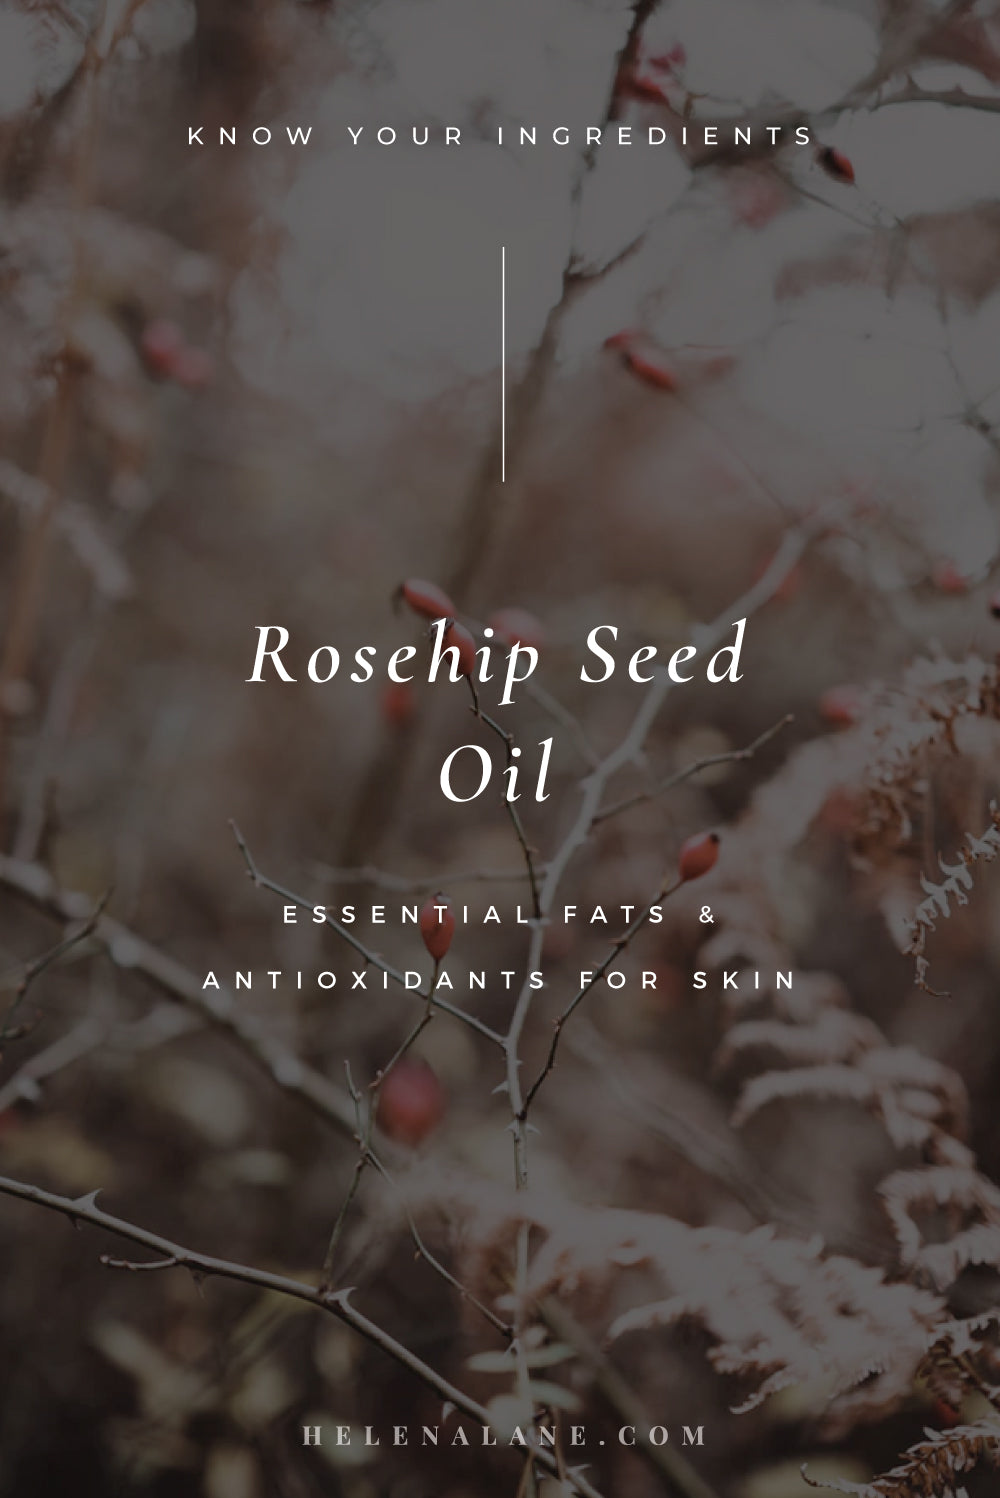 Rosehip Seed Oil – my first love in plant oils